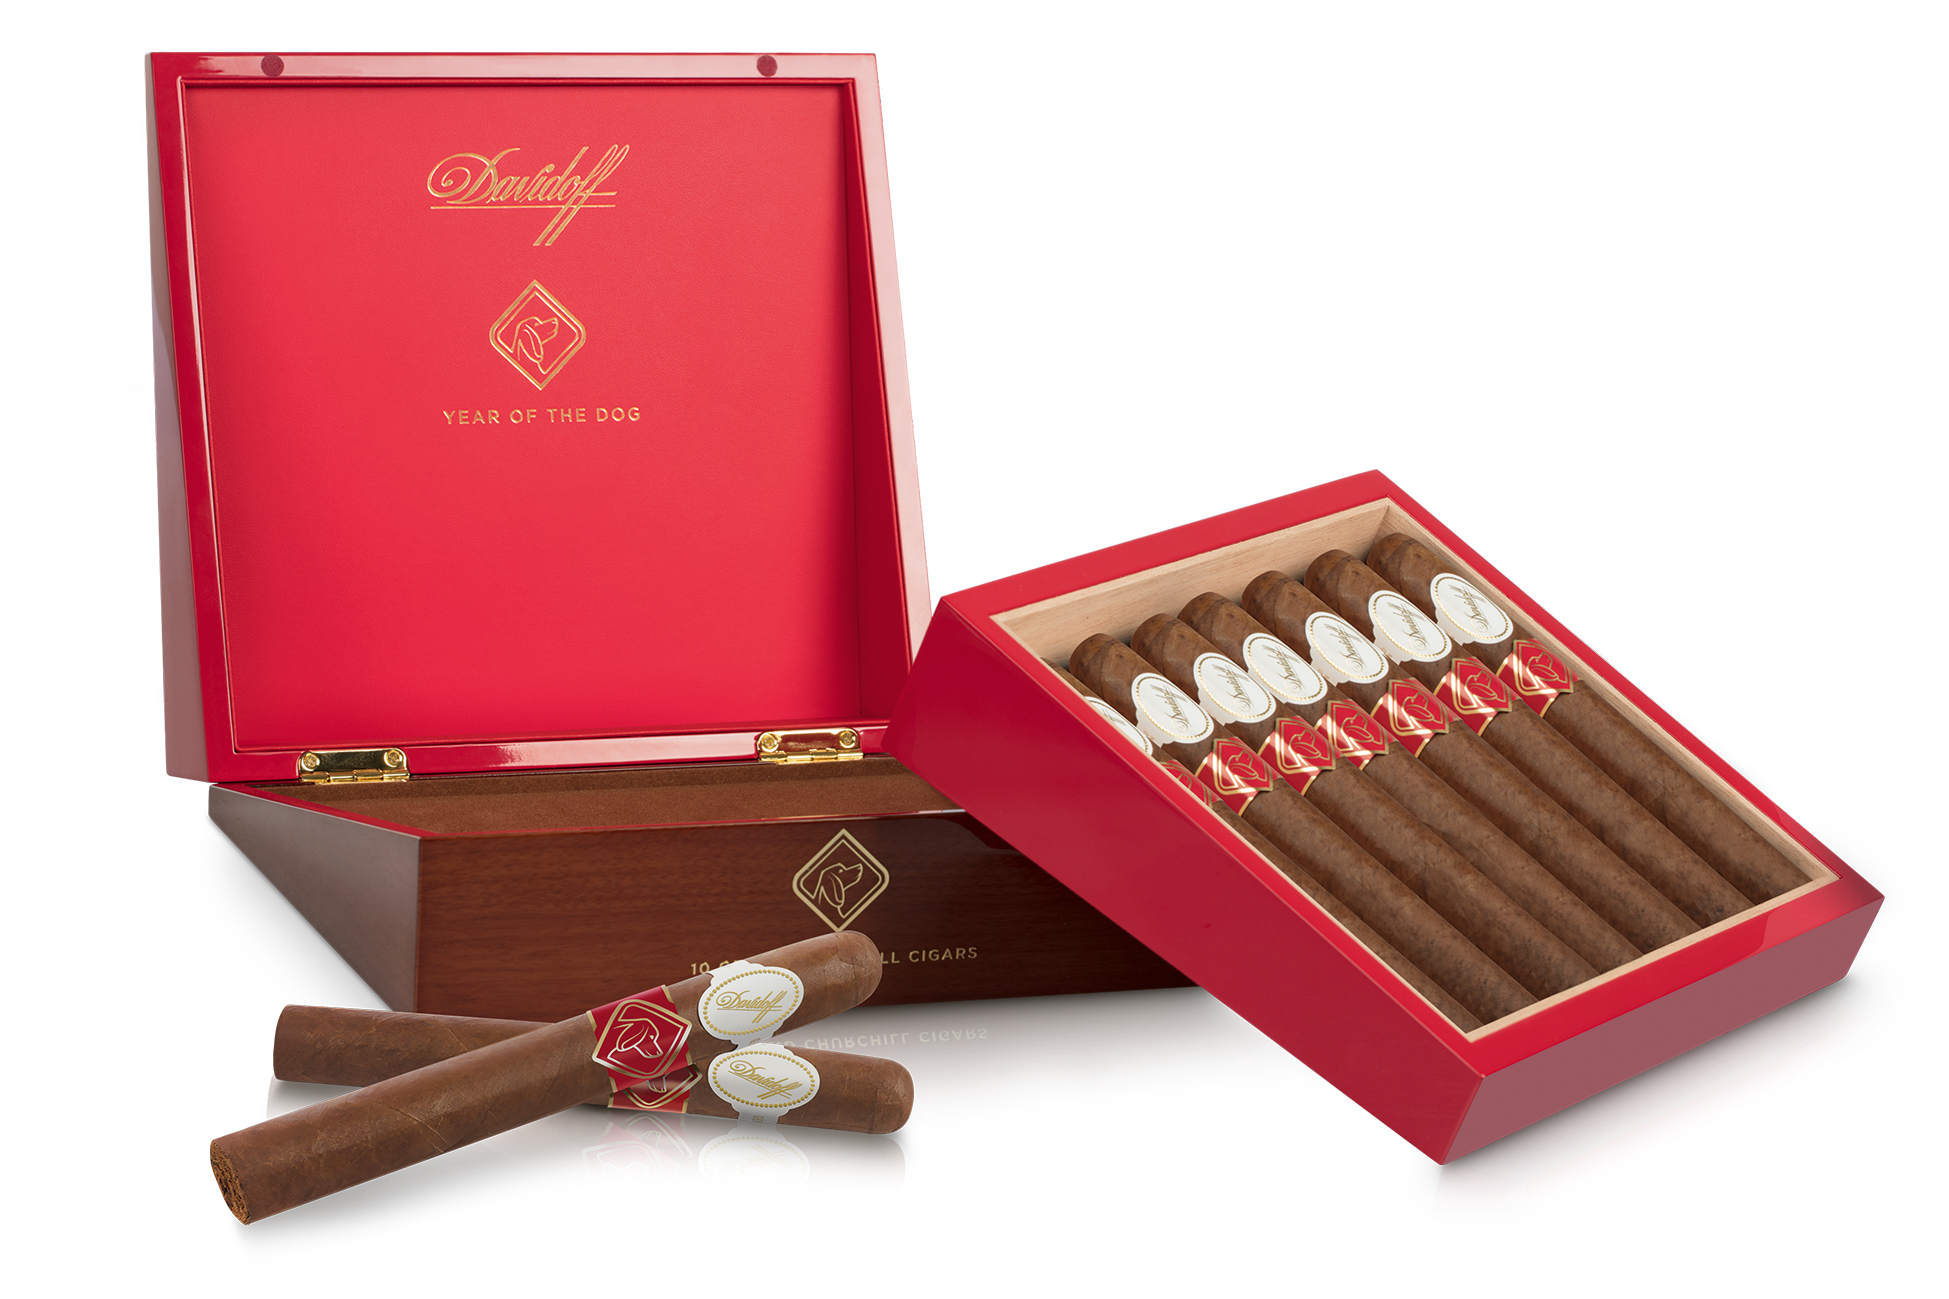 Davidoff Year of the Dog Limited Edition 2018